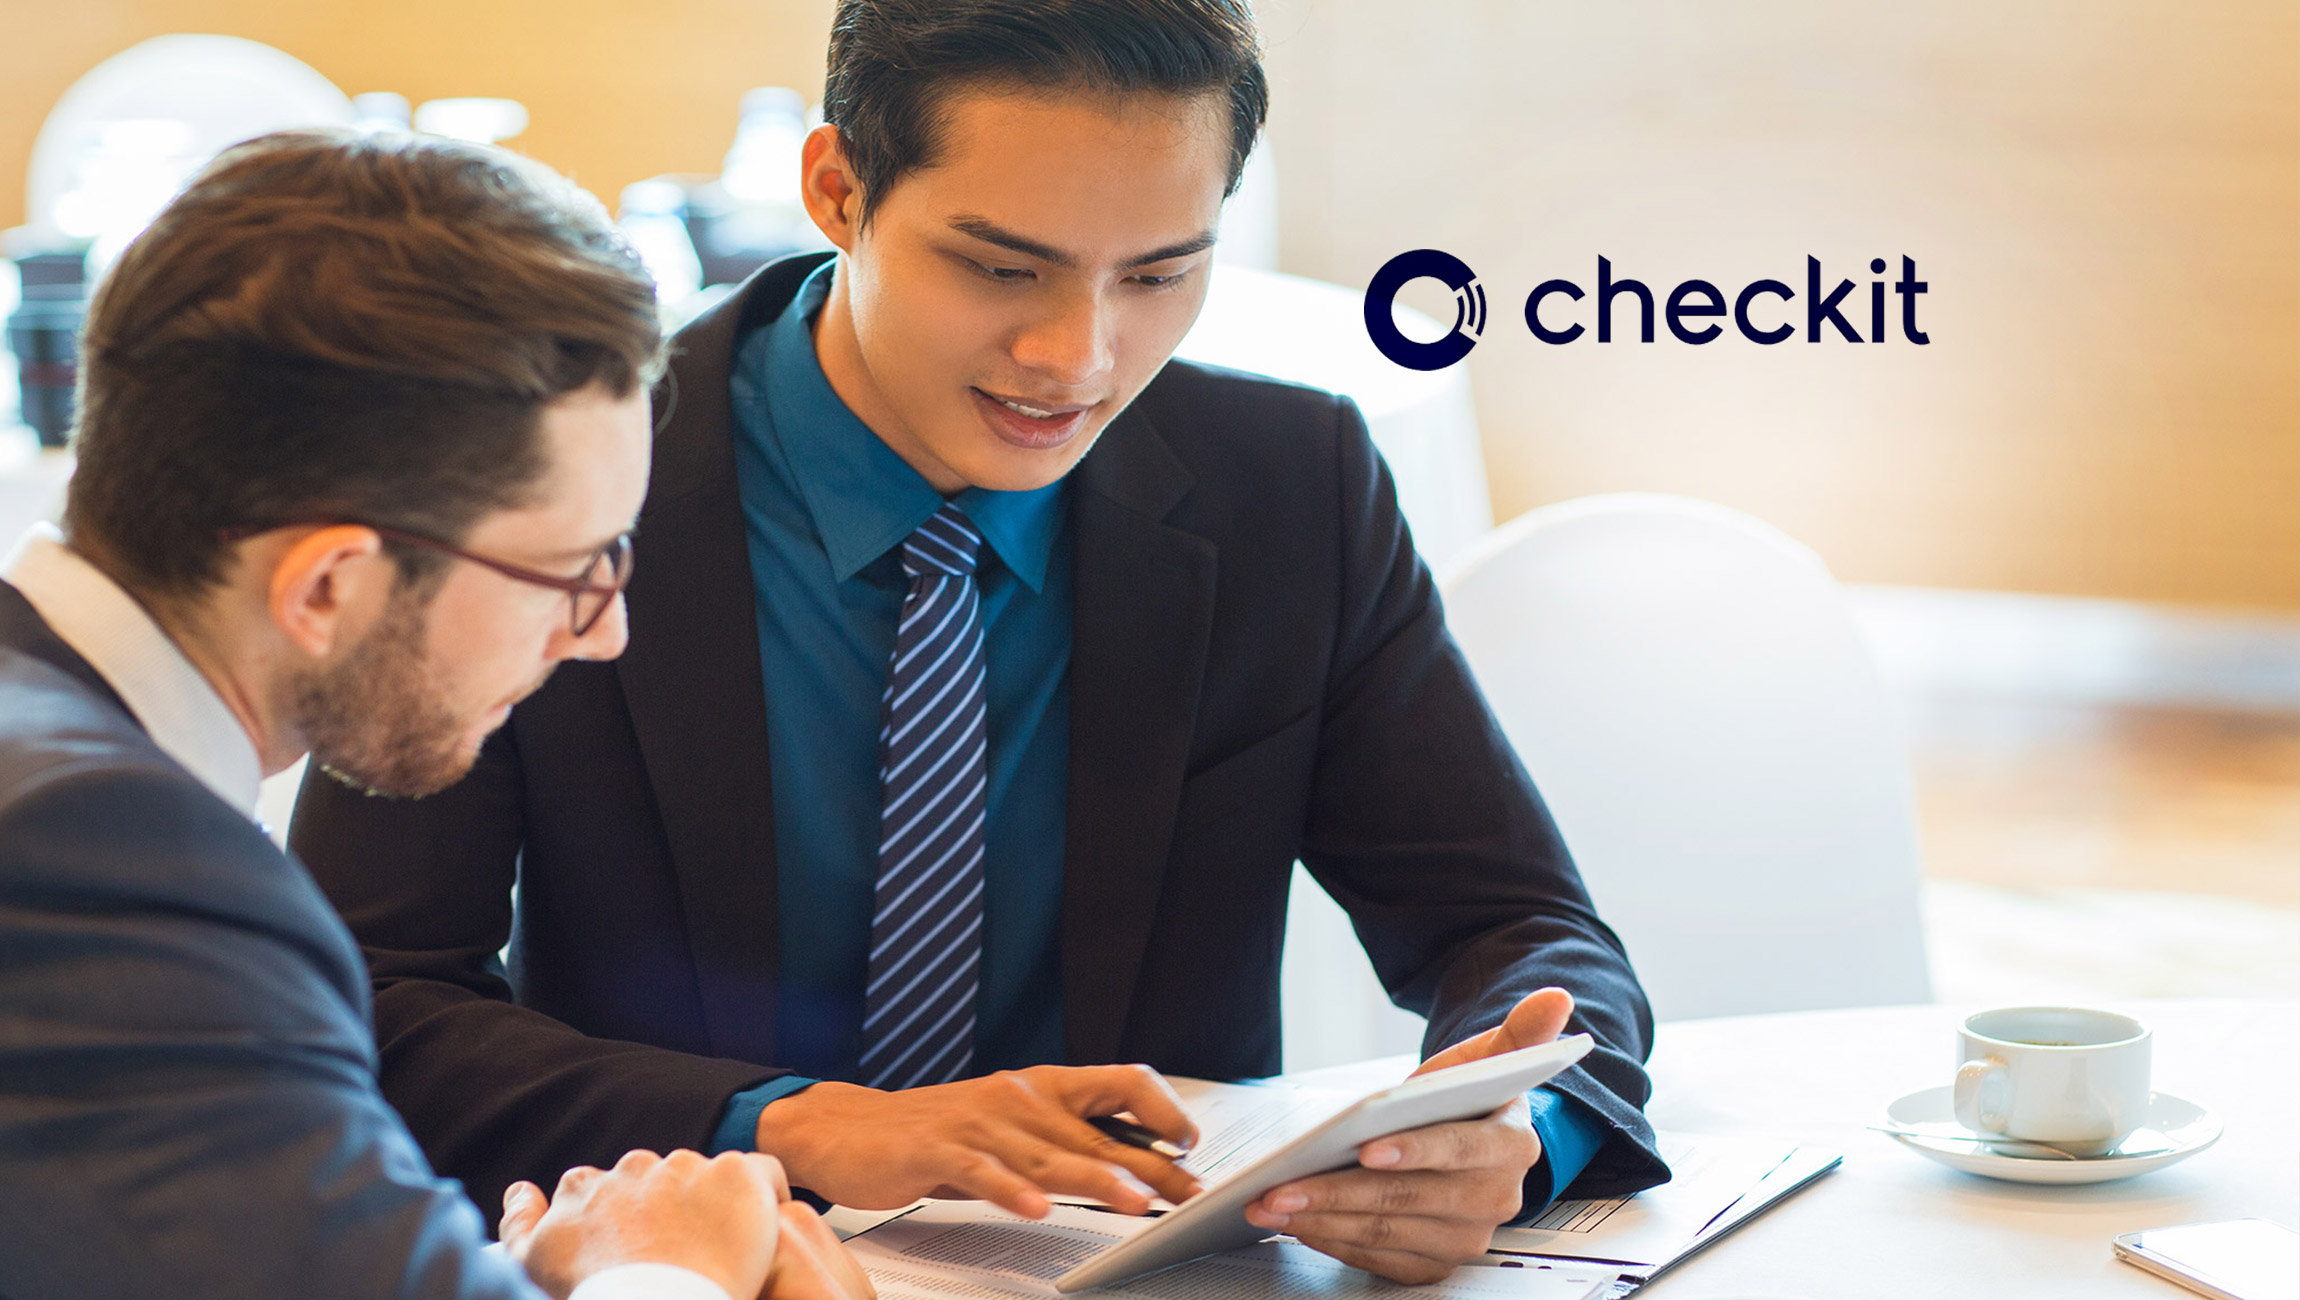 Checkit to Bring Intelligent Operations Platform to 441 bp Sites in Australia and New Zealand